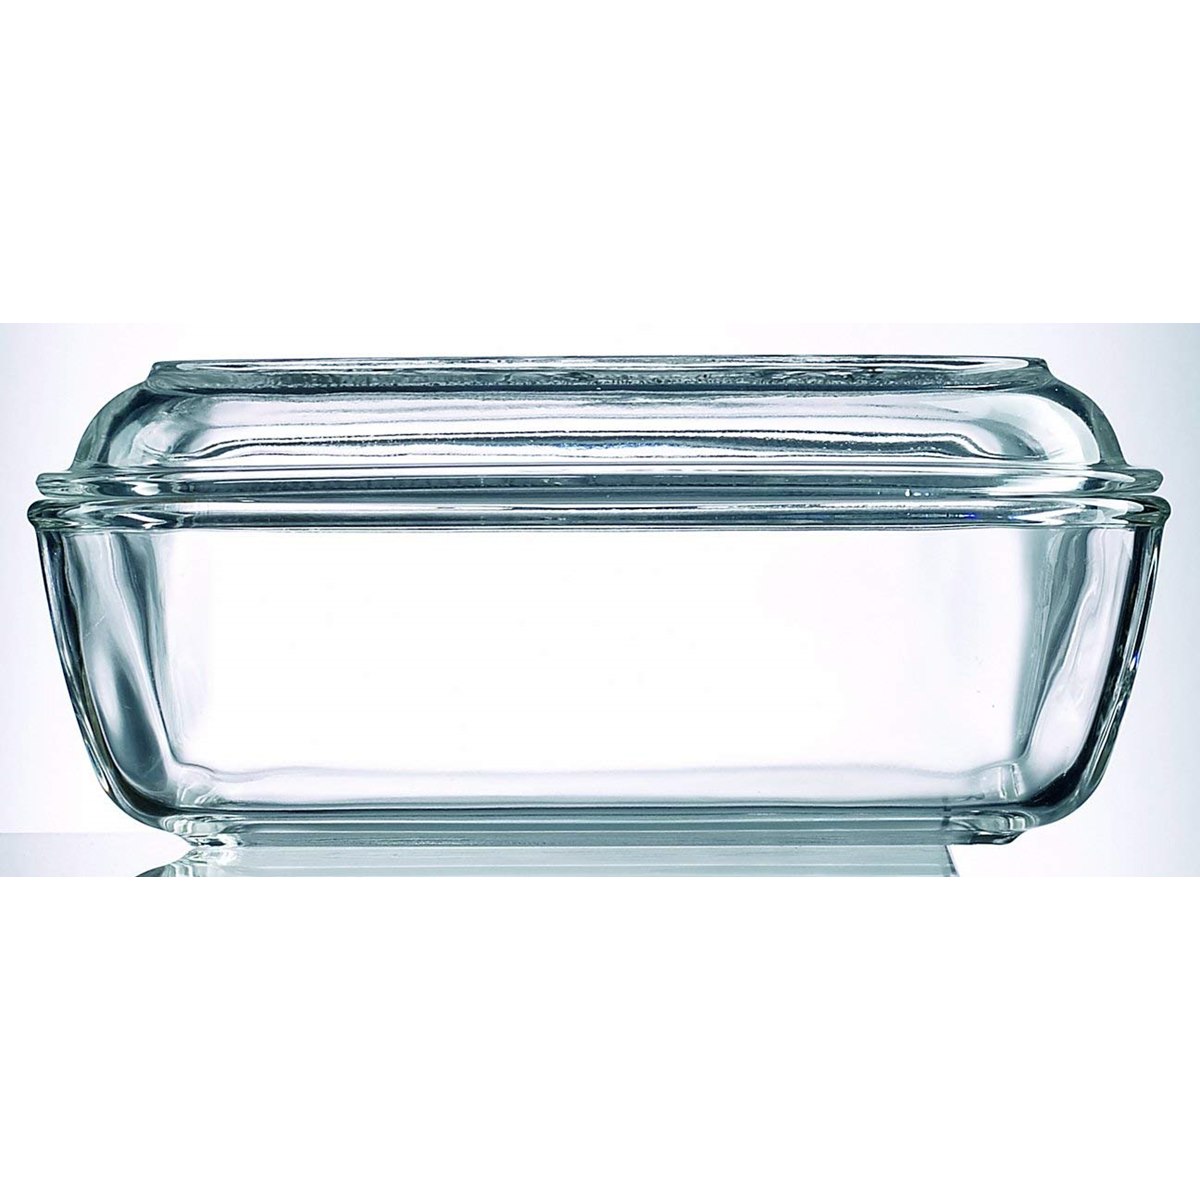 Where to Buy a Glass Butter Dish